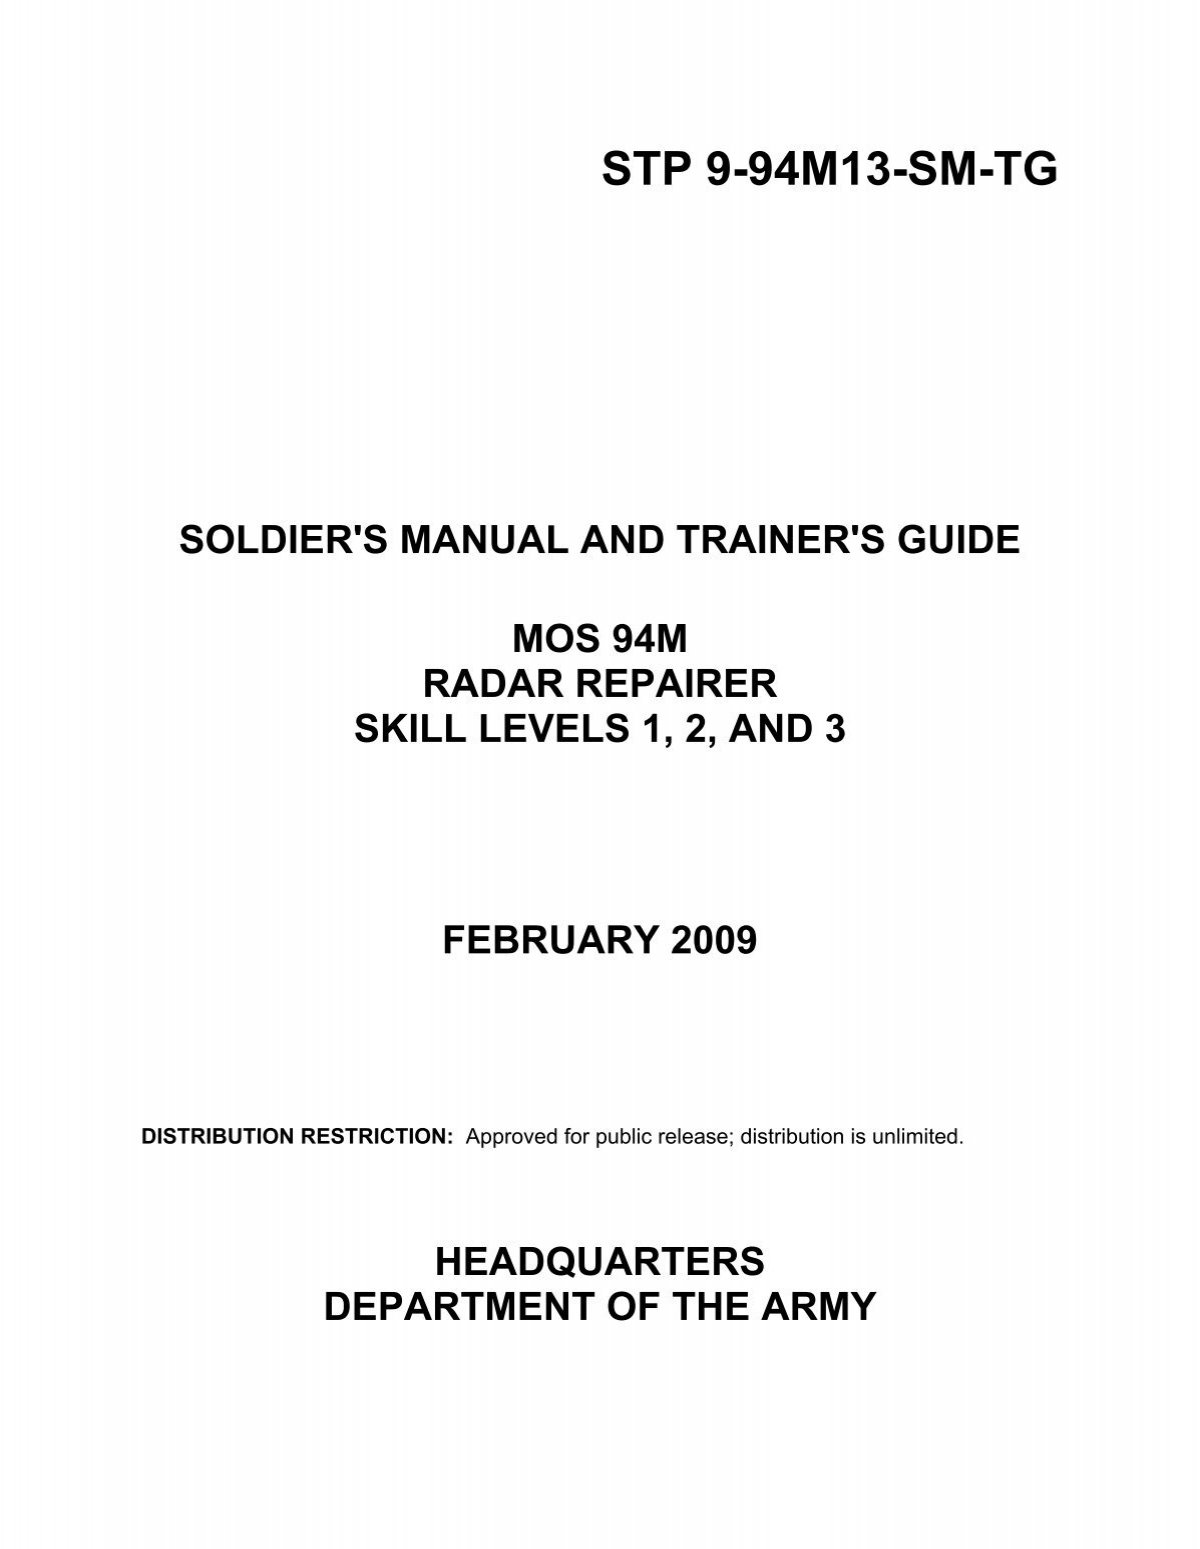 STP 9-94M13-SM-TG - Leader Development for Army Professionals